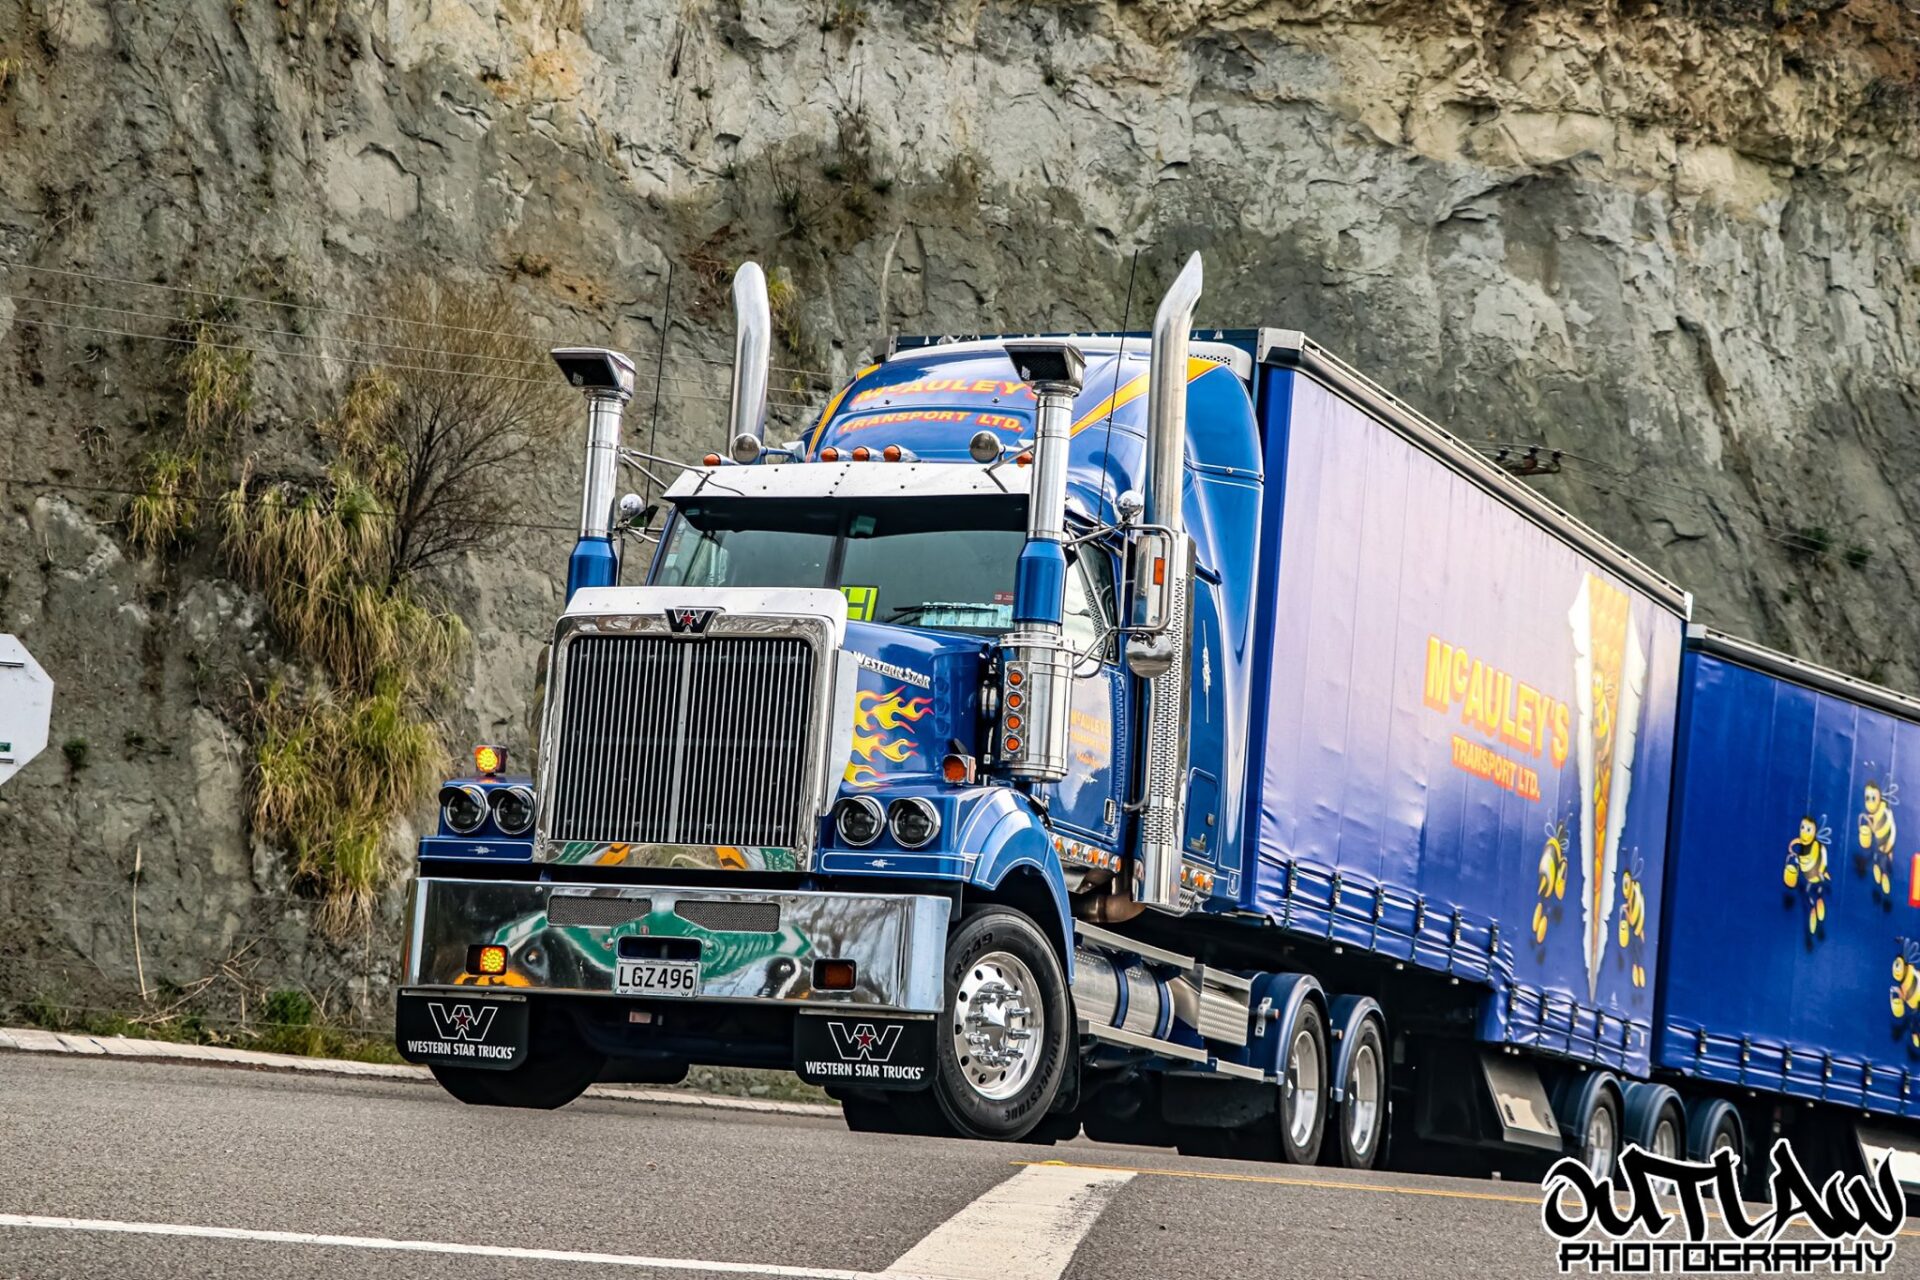 McAuleys Transport truck in action driving over the Remutaka hill